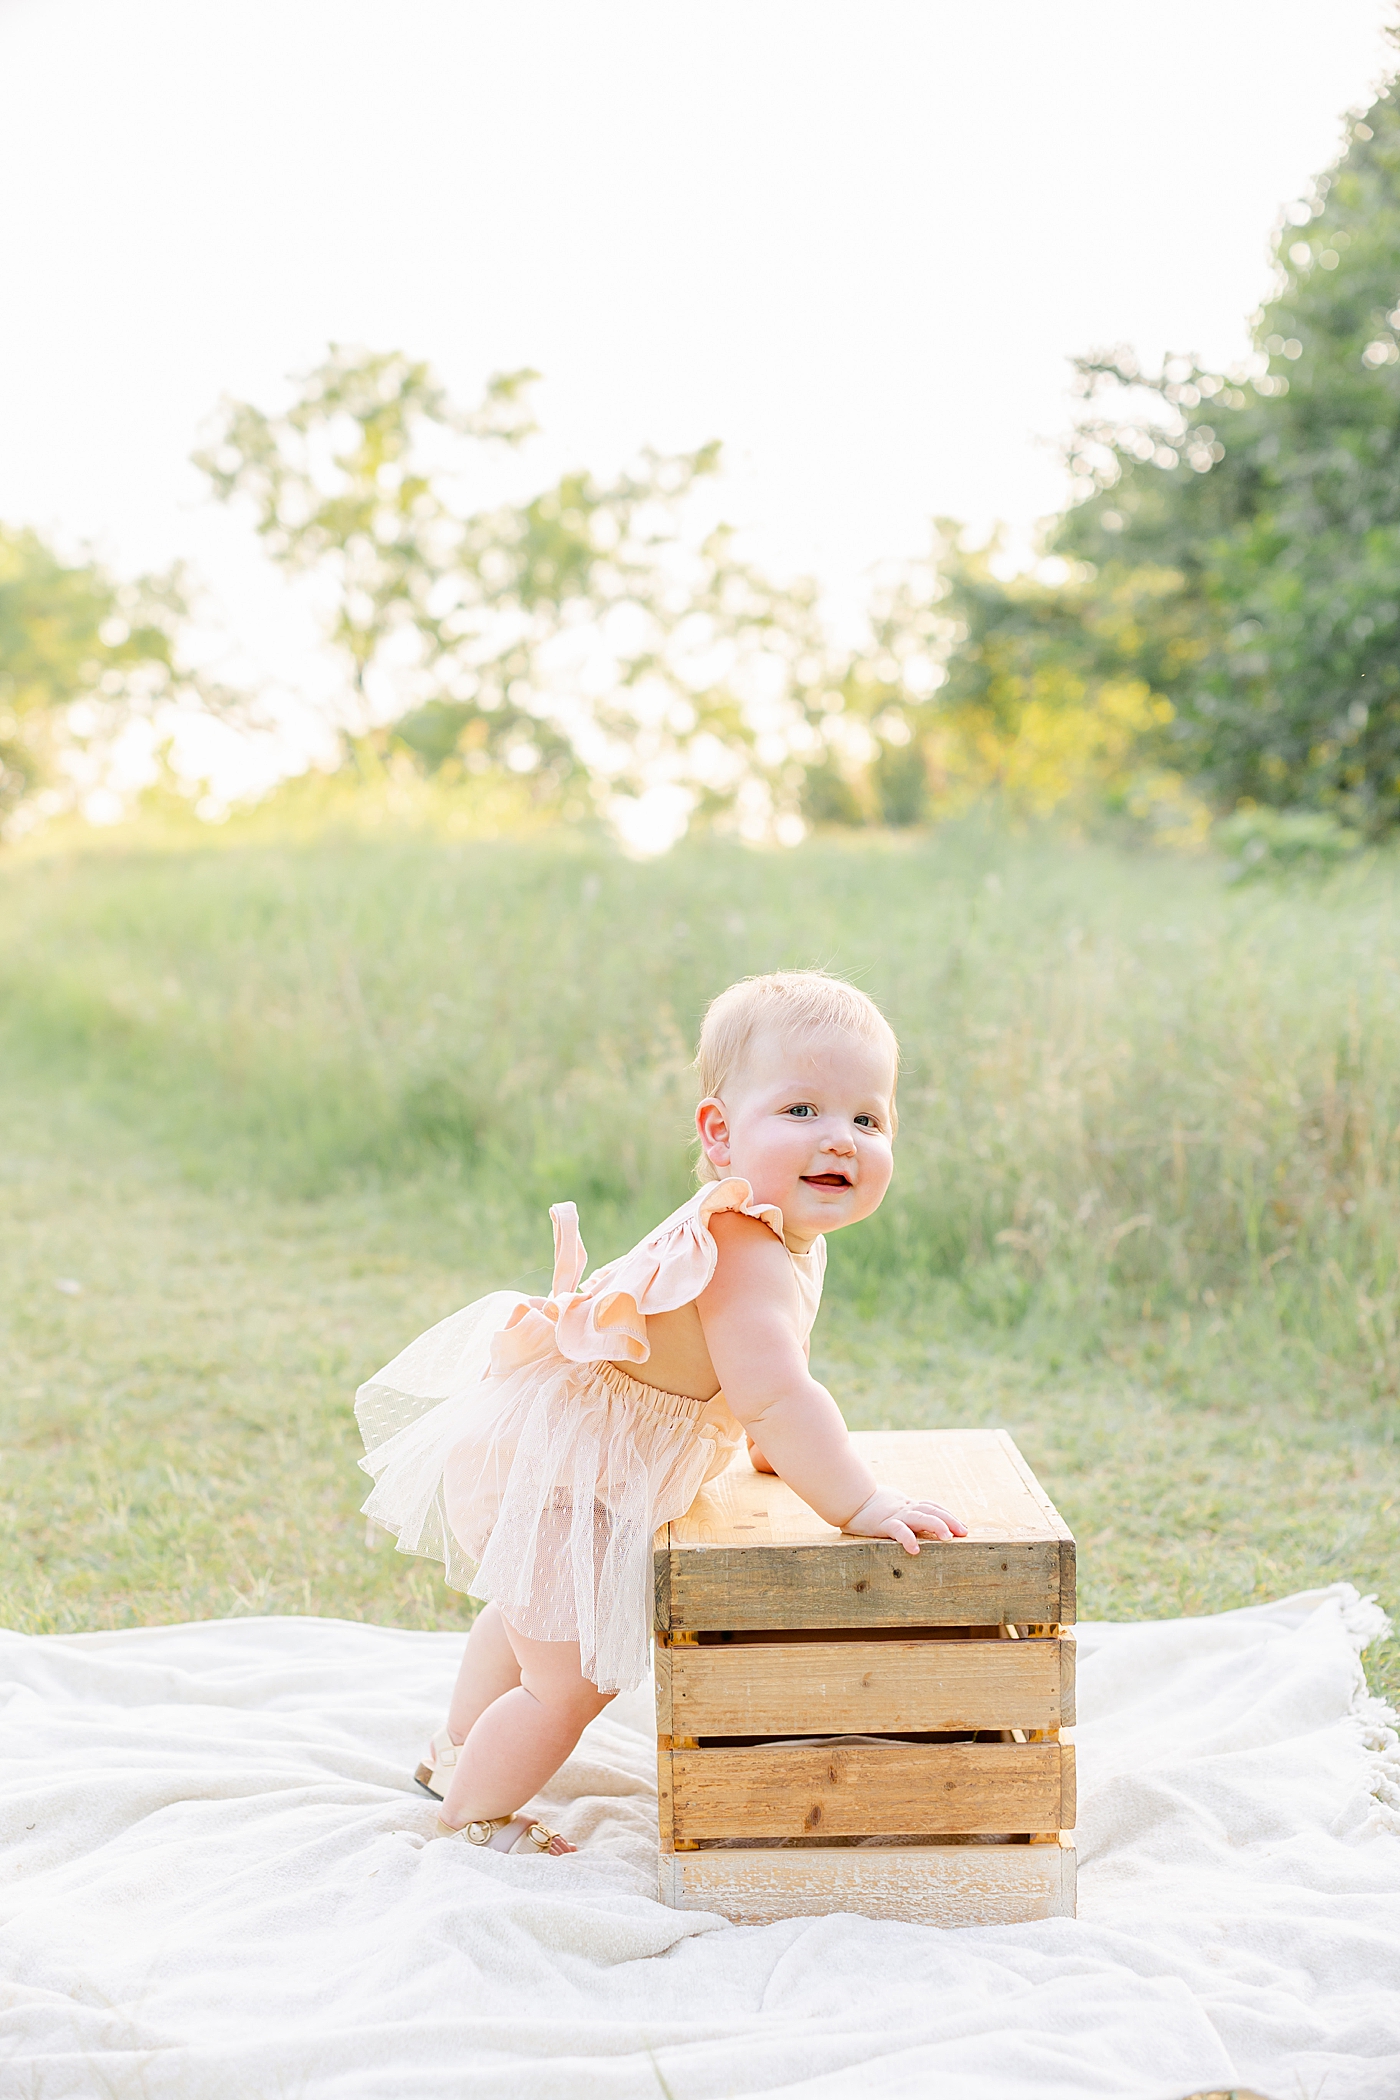 Baby girl standing with a box in a field during her one year milestone session | Sana Ahmed Photography